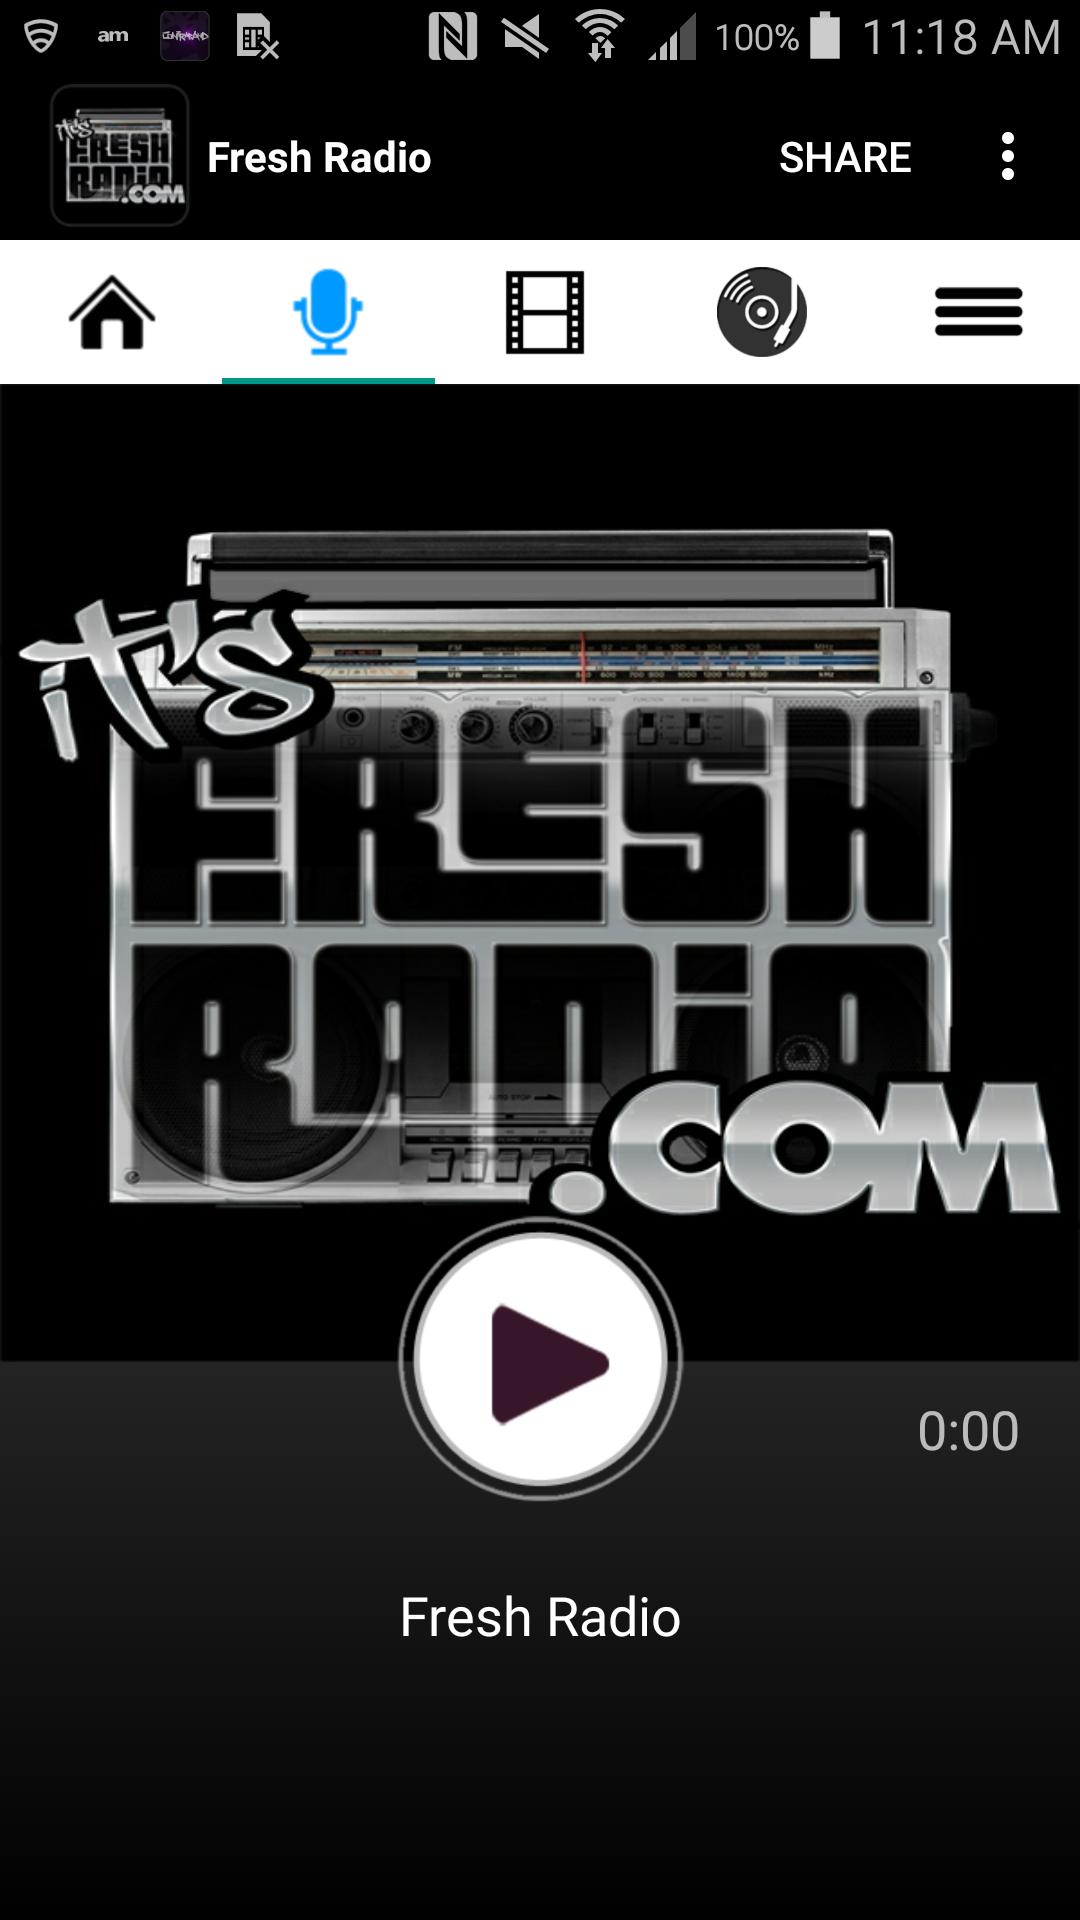 Fresh Radio for Android - APK Download